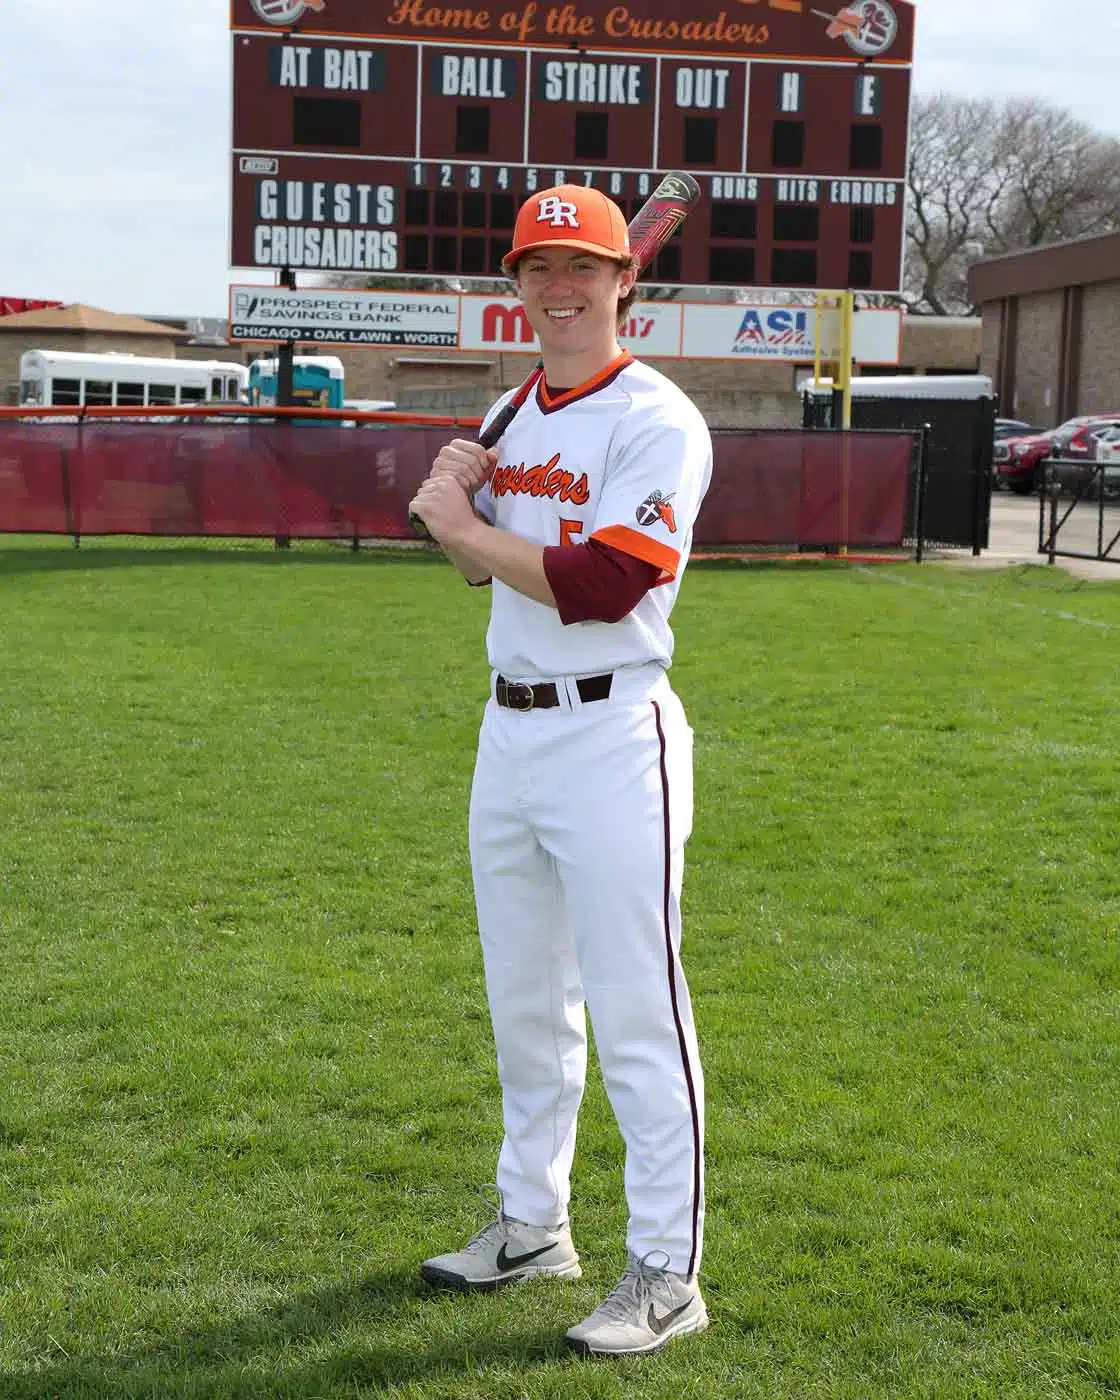 Brother Rice baseball player sport by Tom Killoran Photography